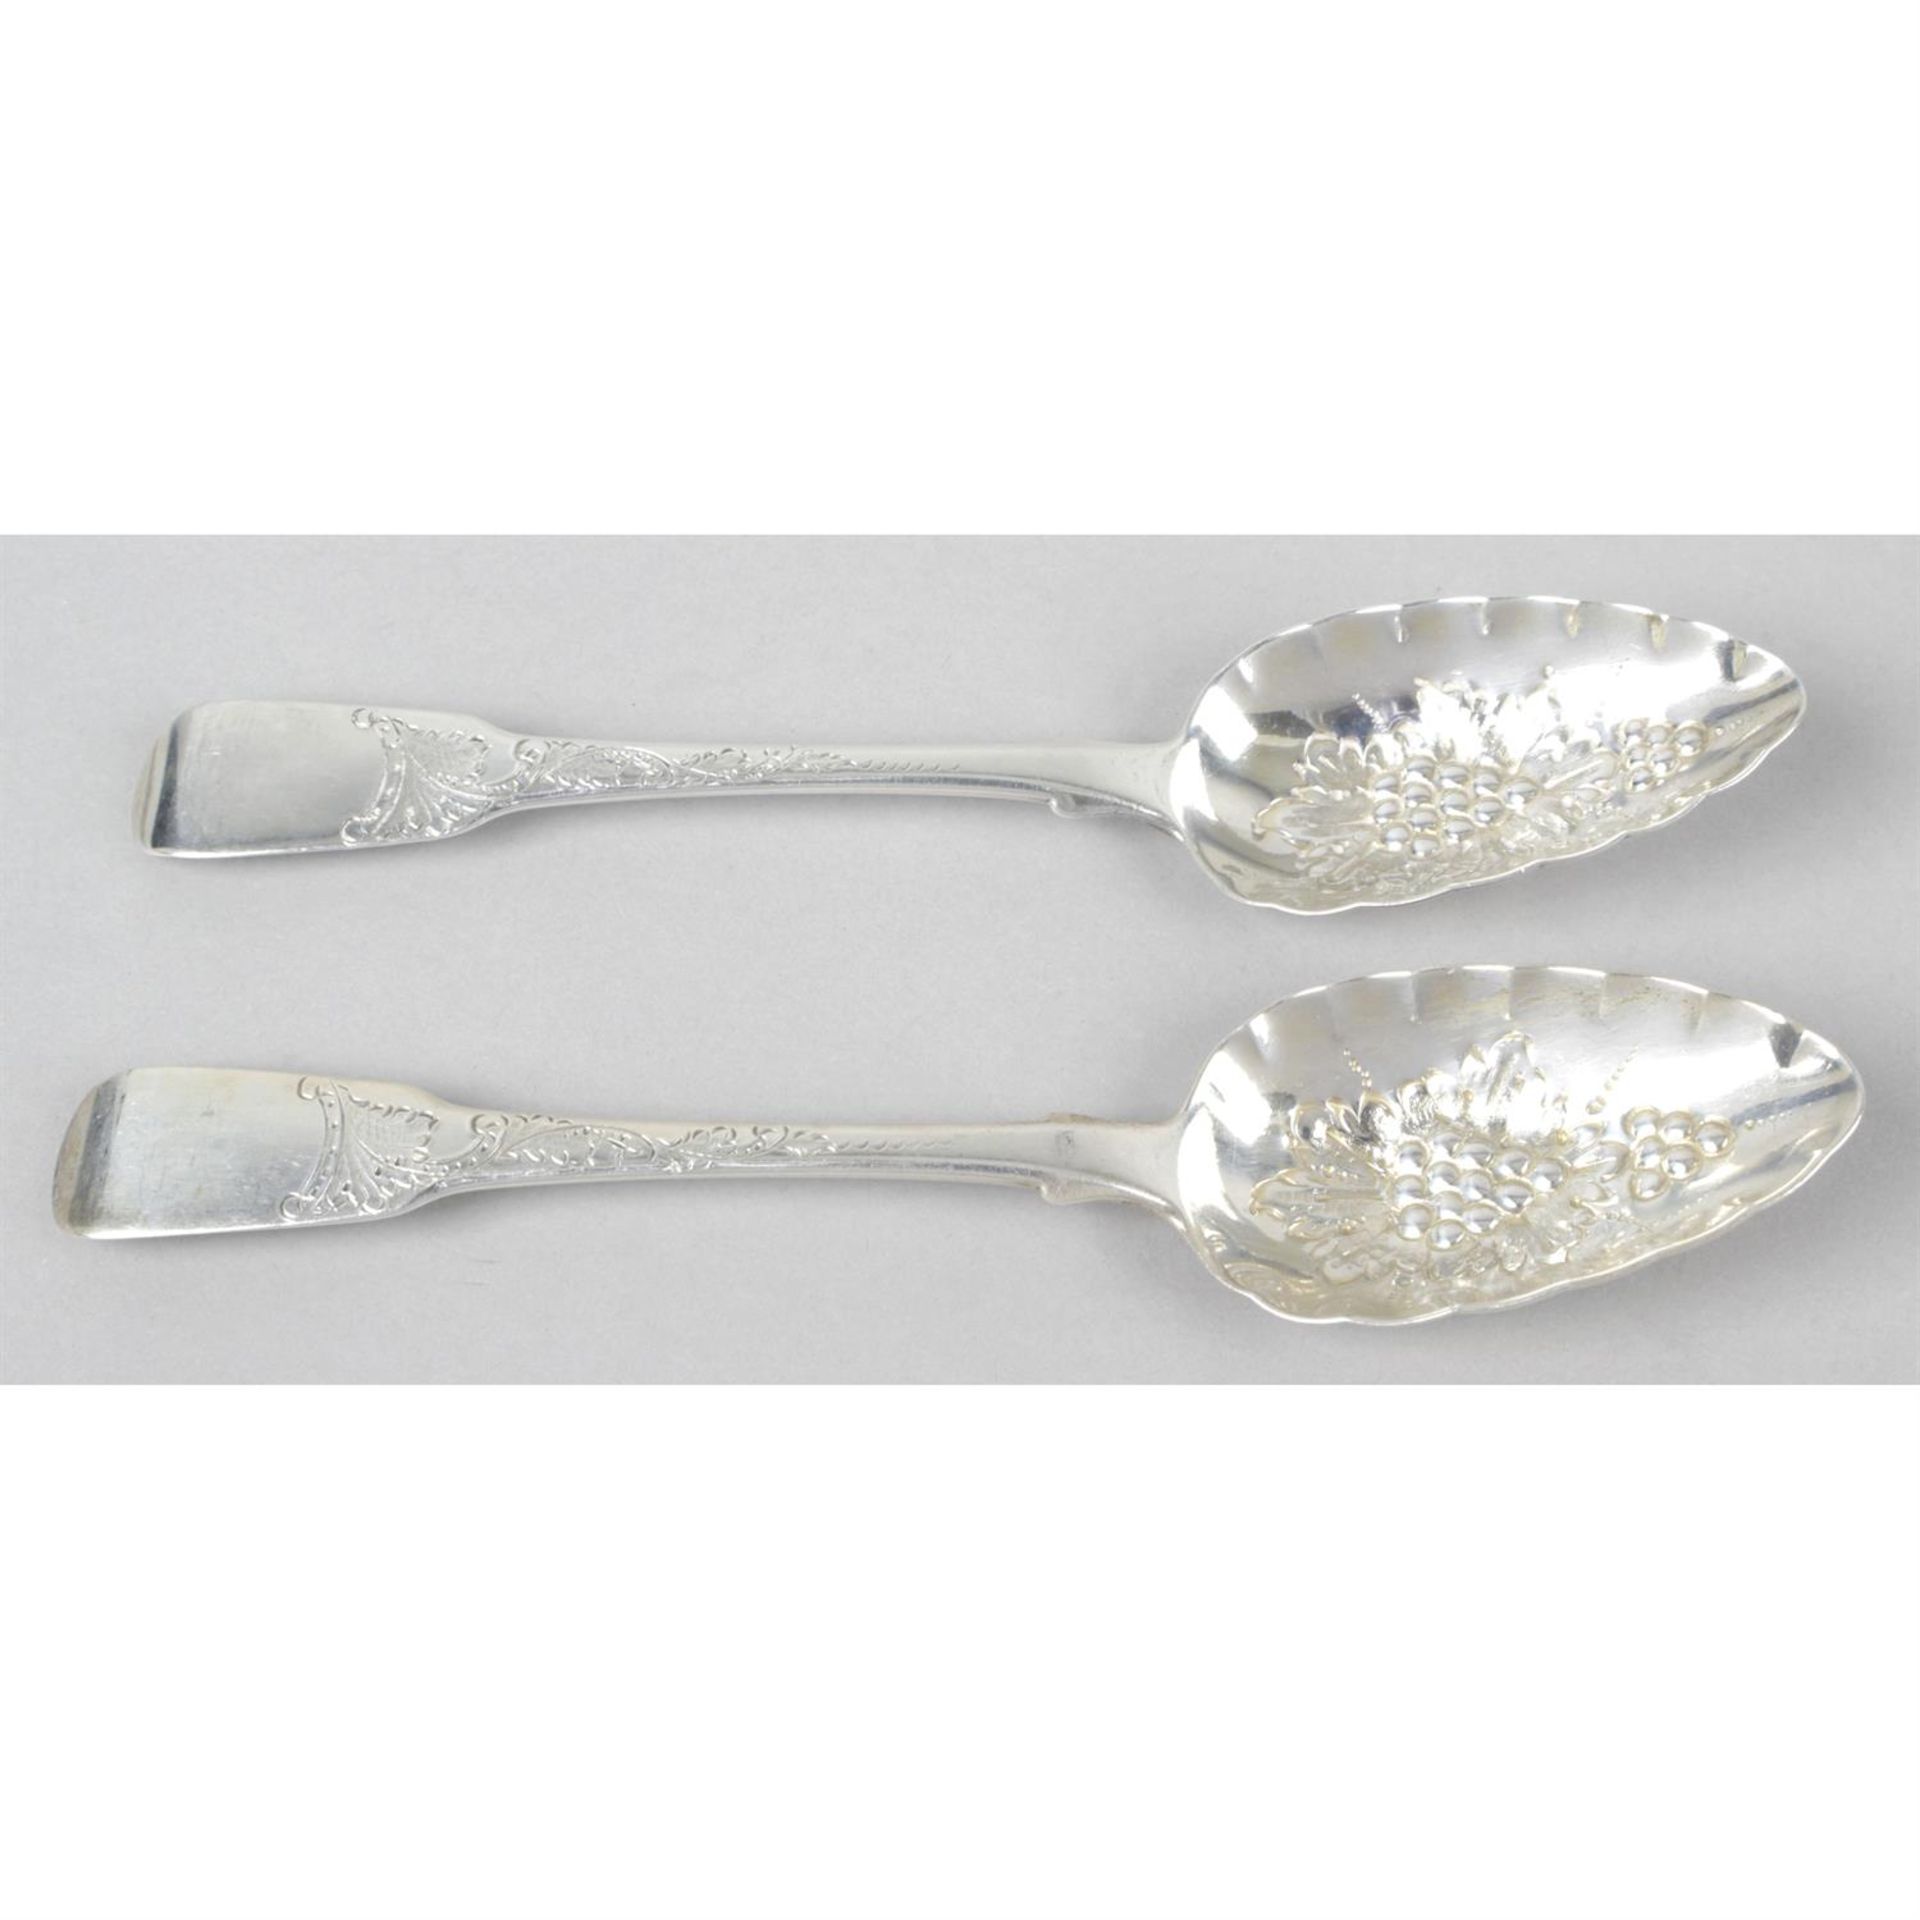 A pair of late George III silver 'berry' table spoons in Fiddle pattern.